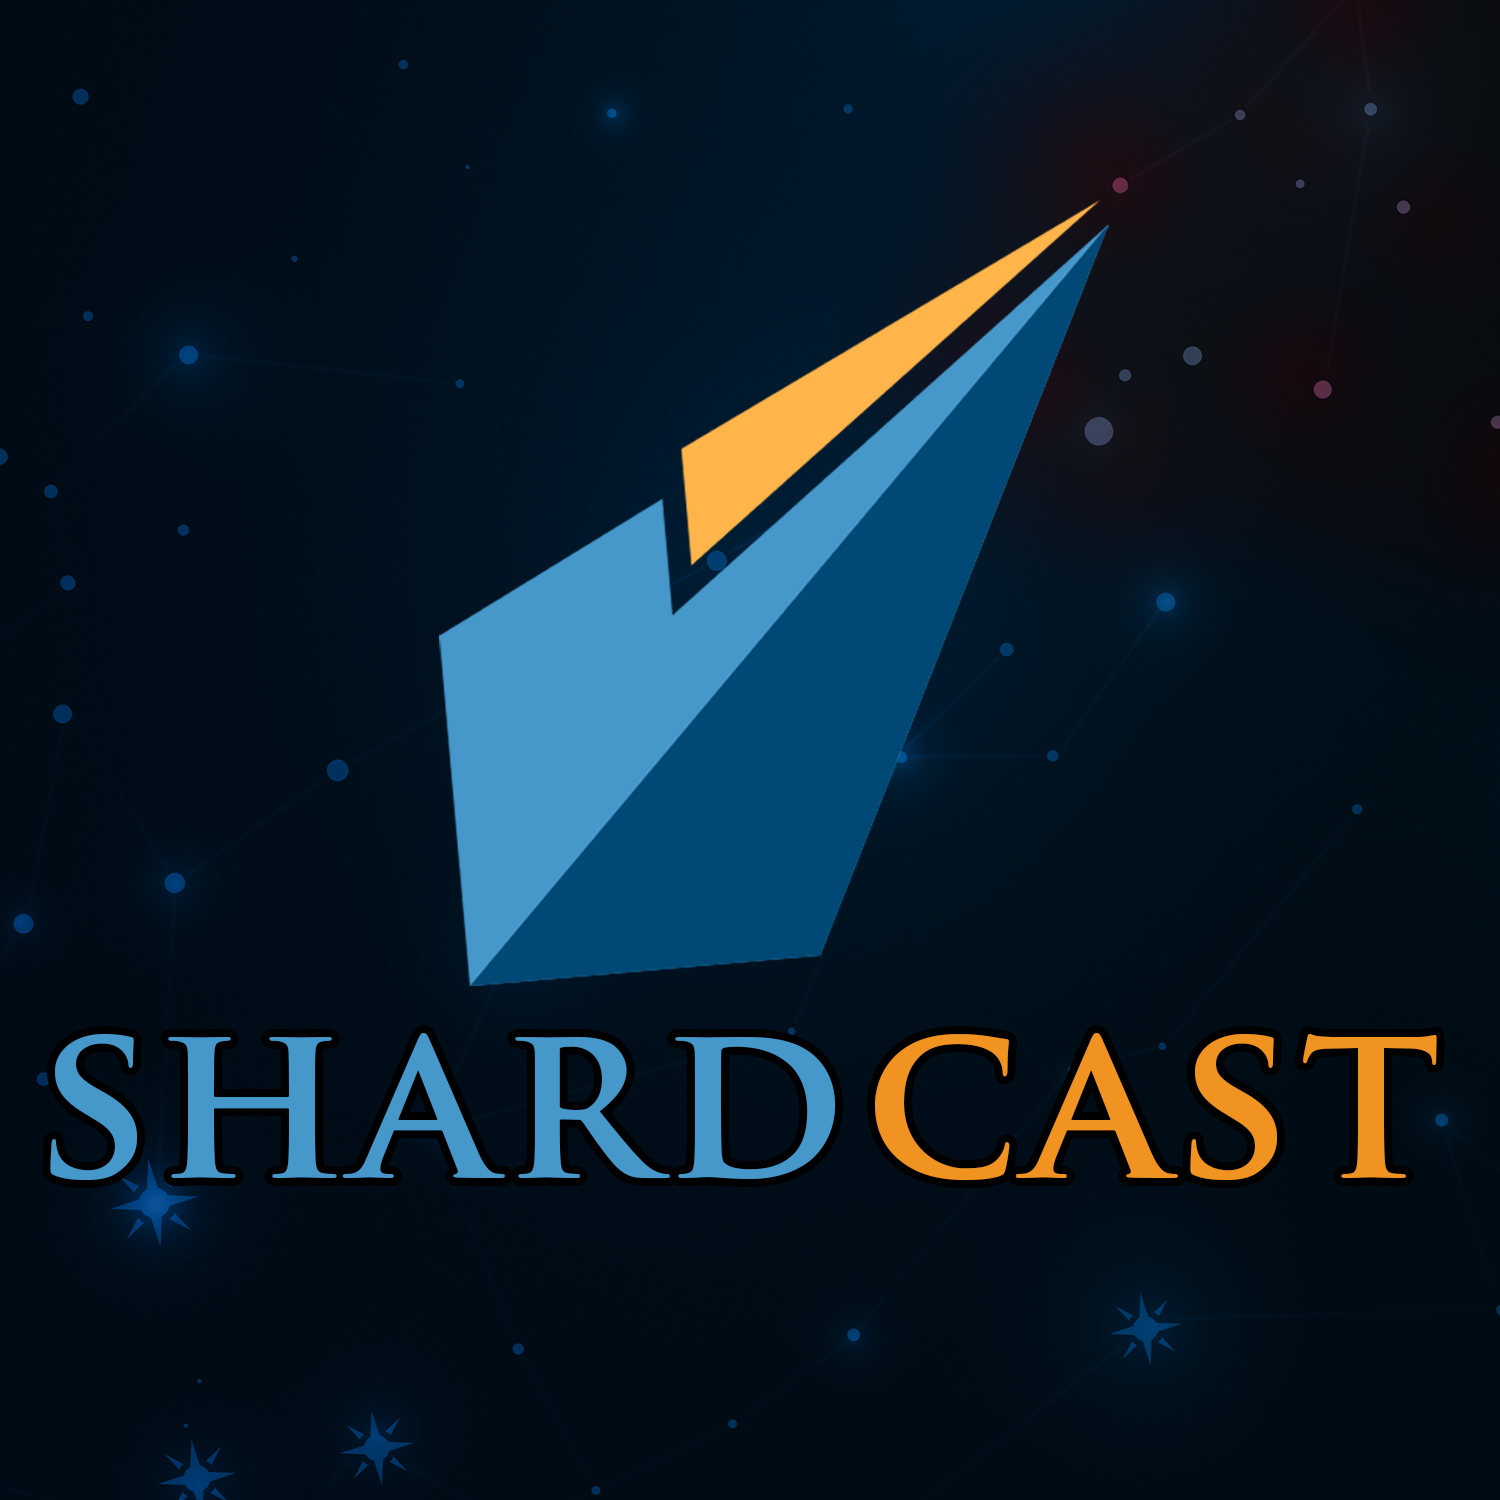 More information about "Shardcast: Midnight Essence and Nightmares"